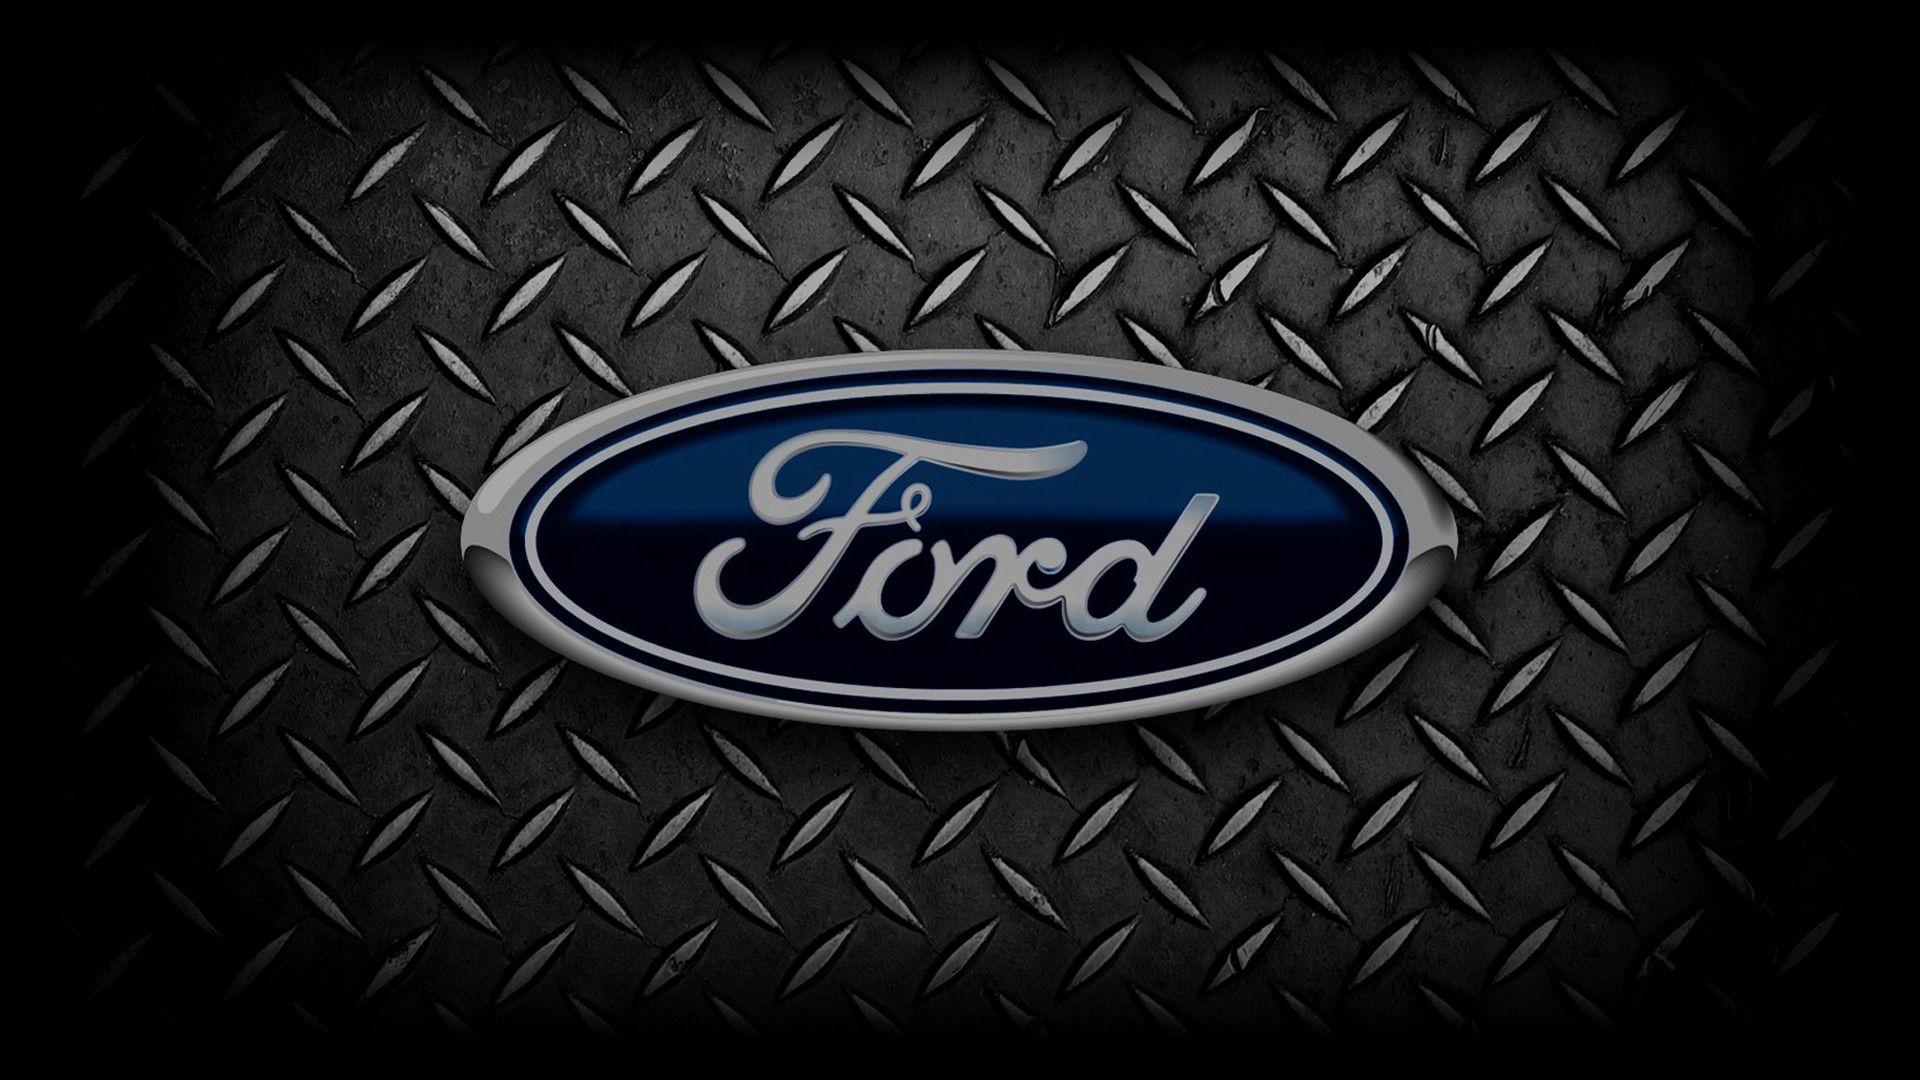 33+ Original Ford Logo Wallpaper For Android full HD